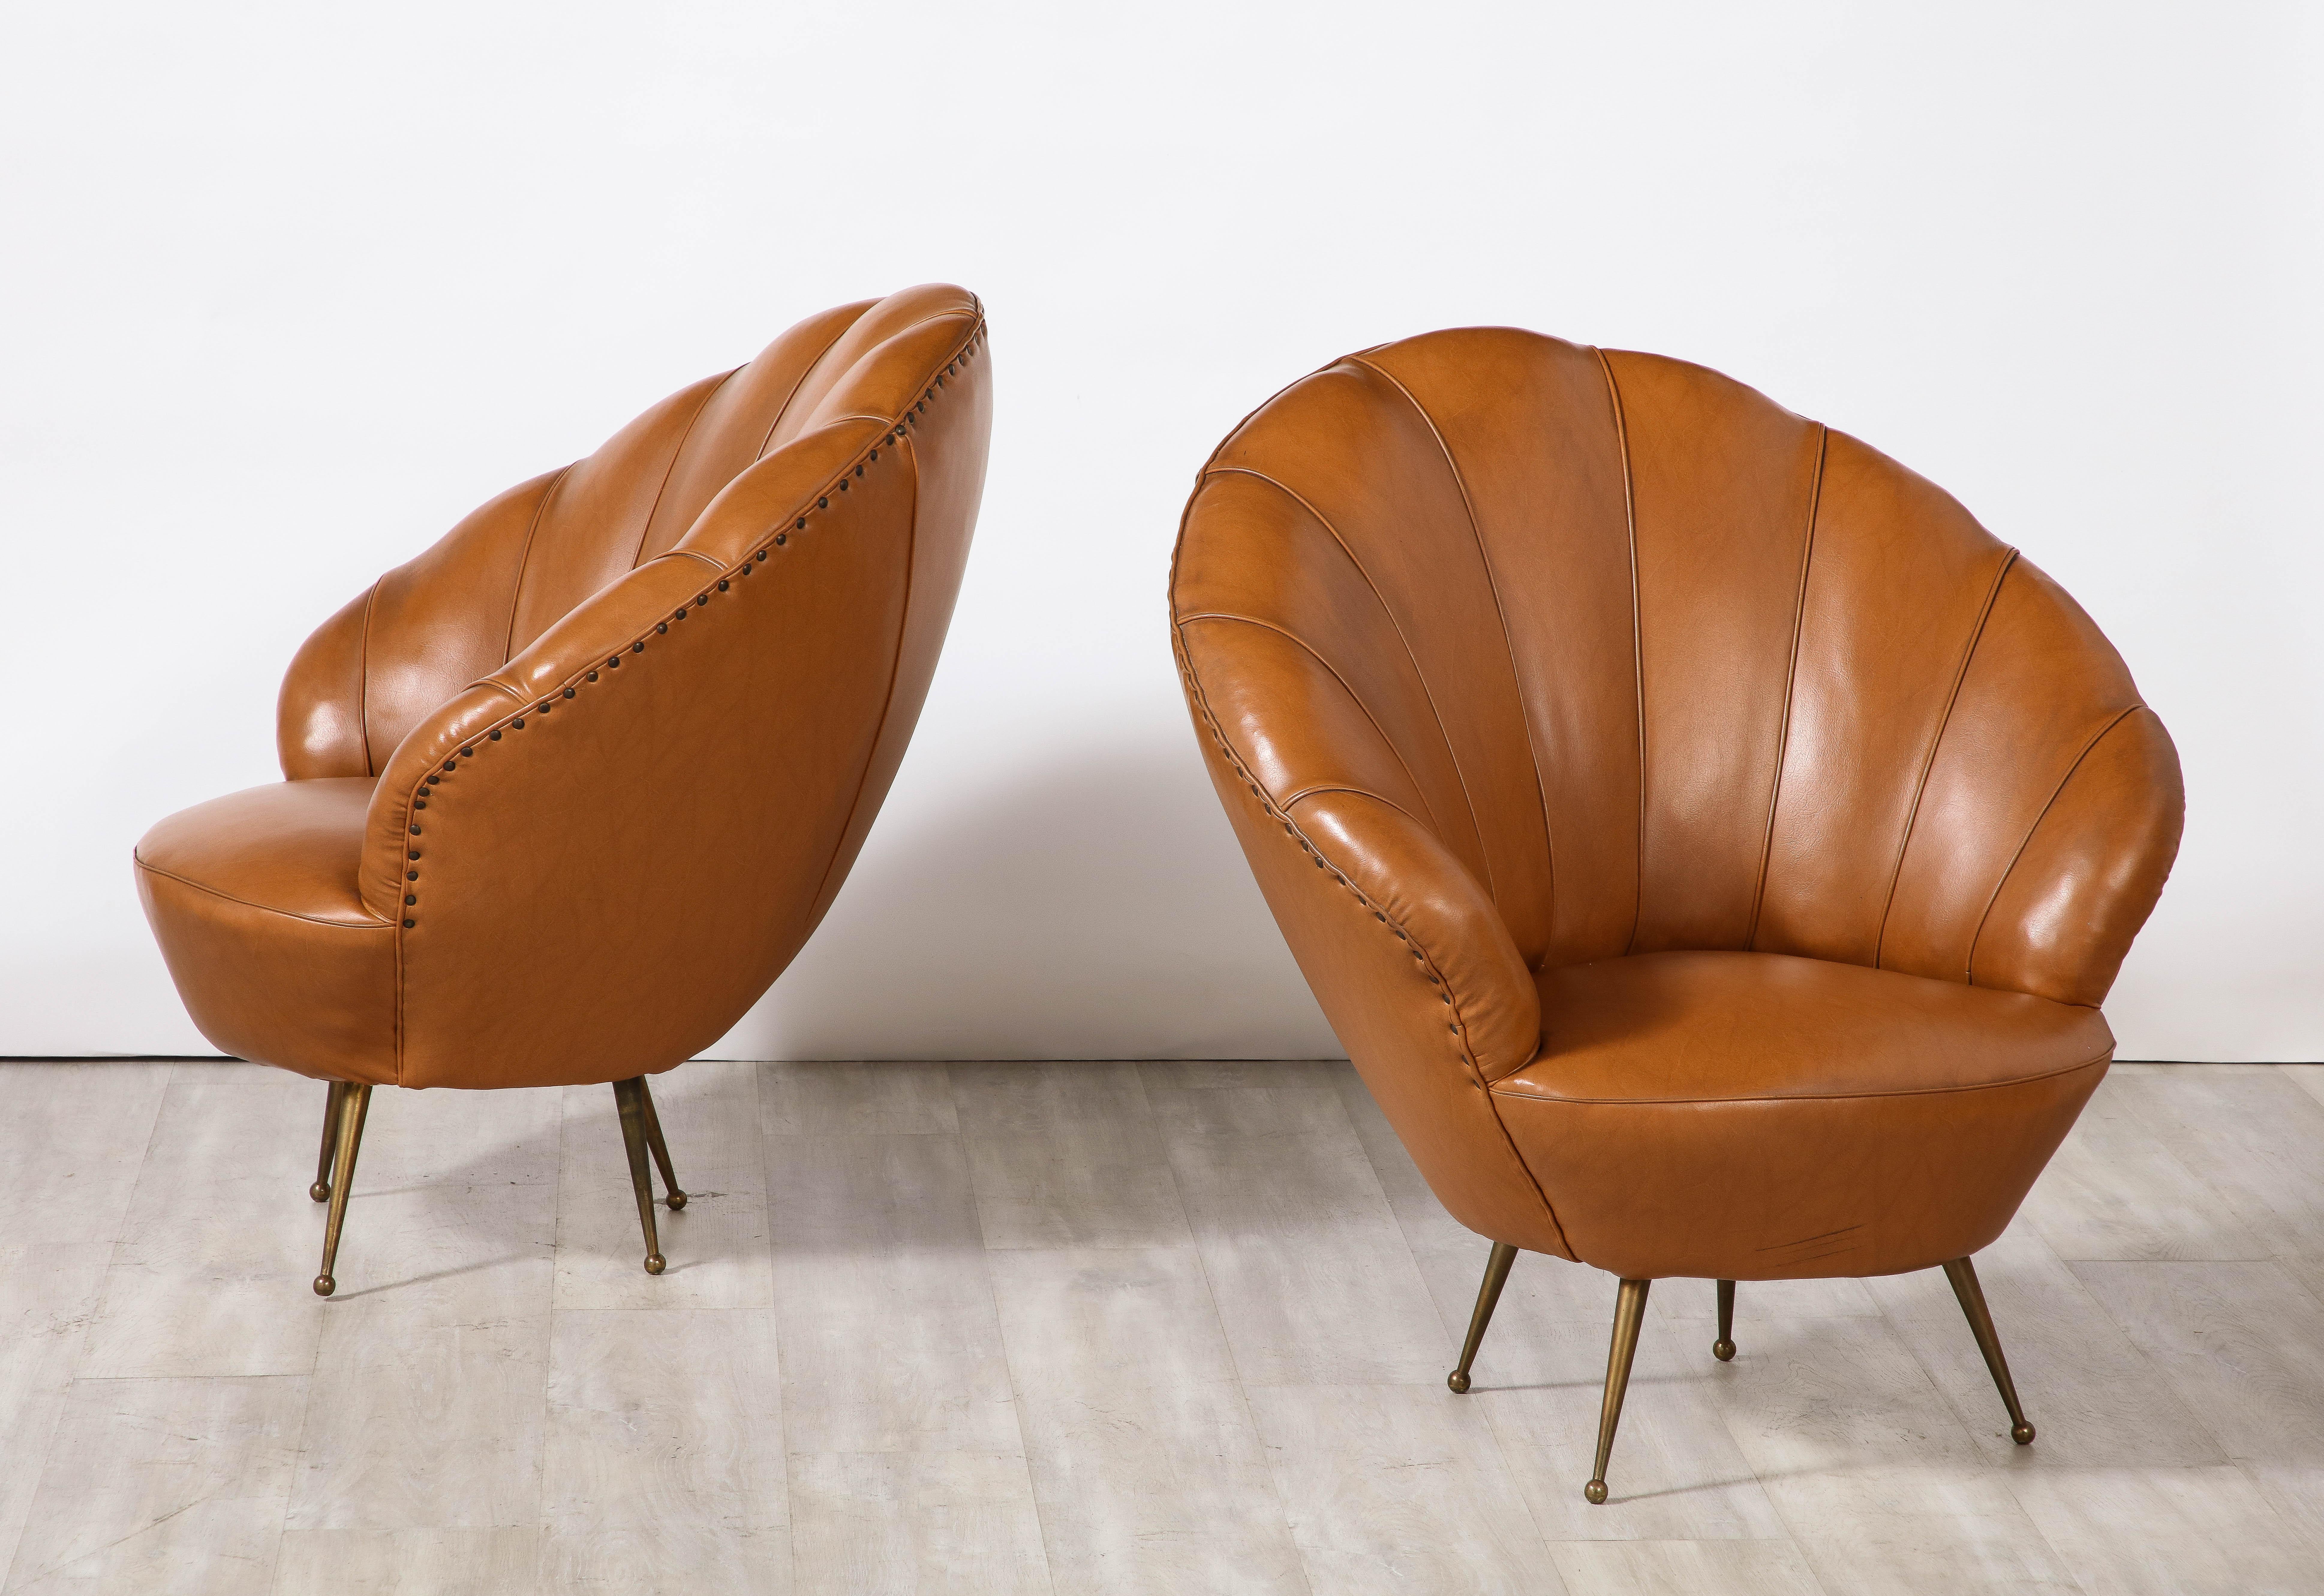 Brass Pair of Italian Modernist Leather Scalloped Lounge Chairs, Circa 1950 